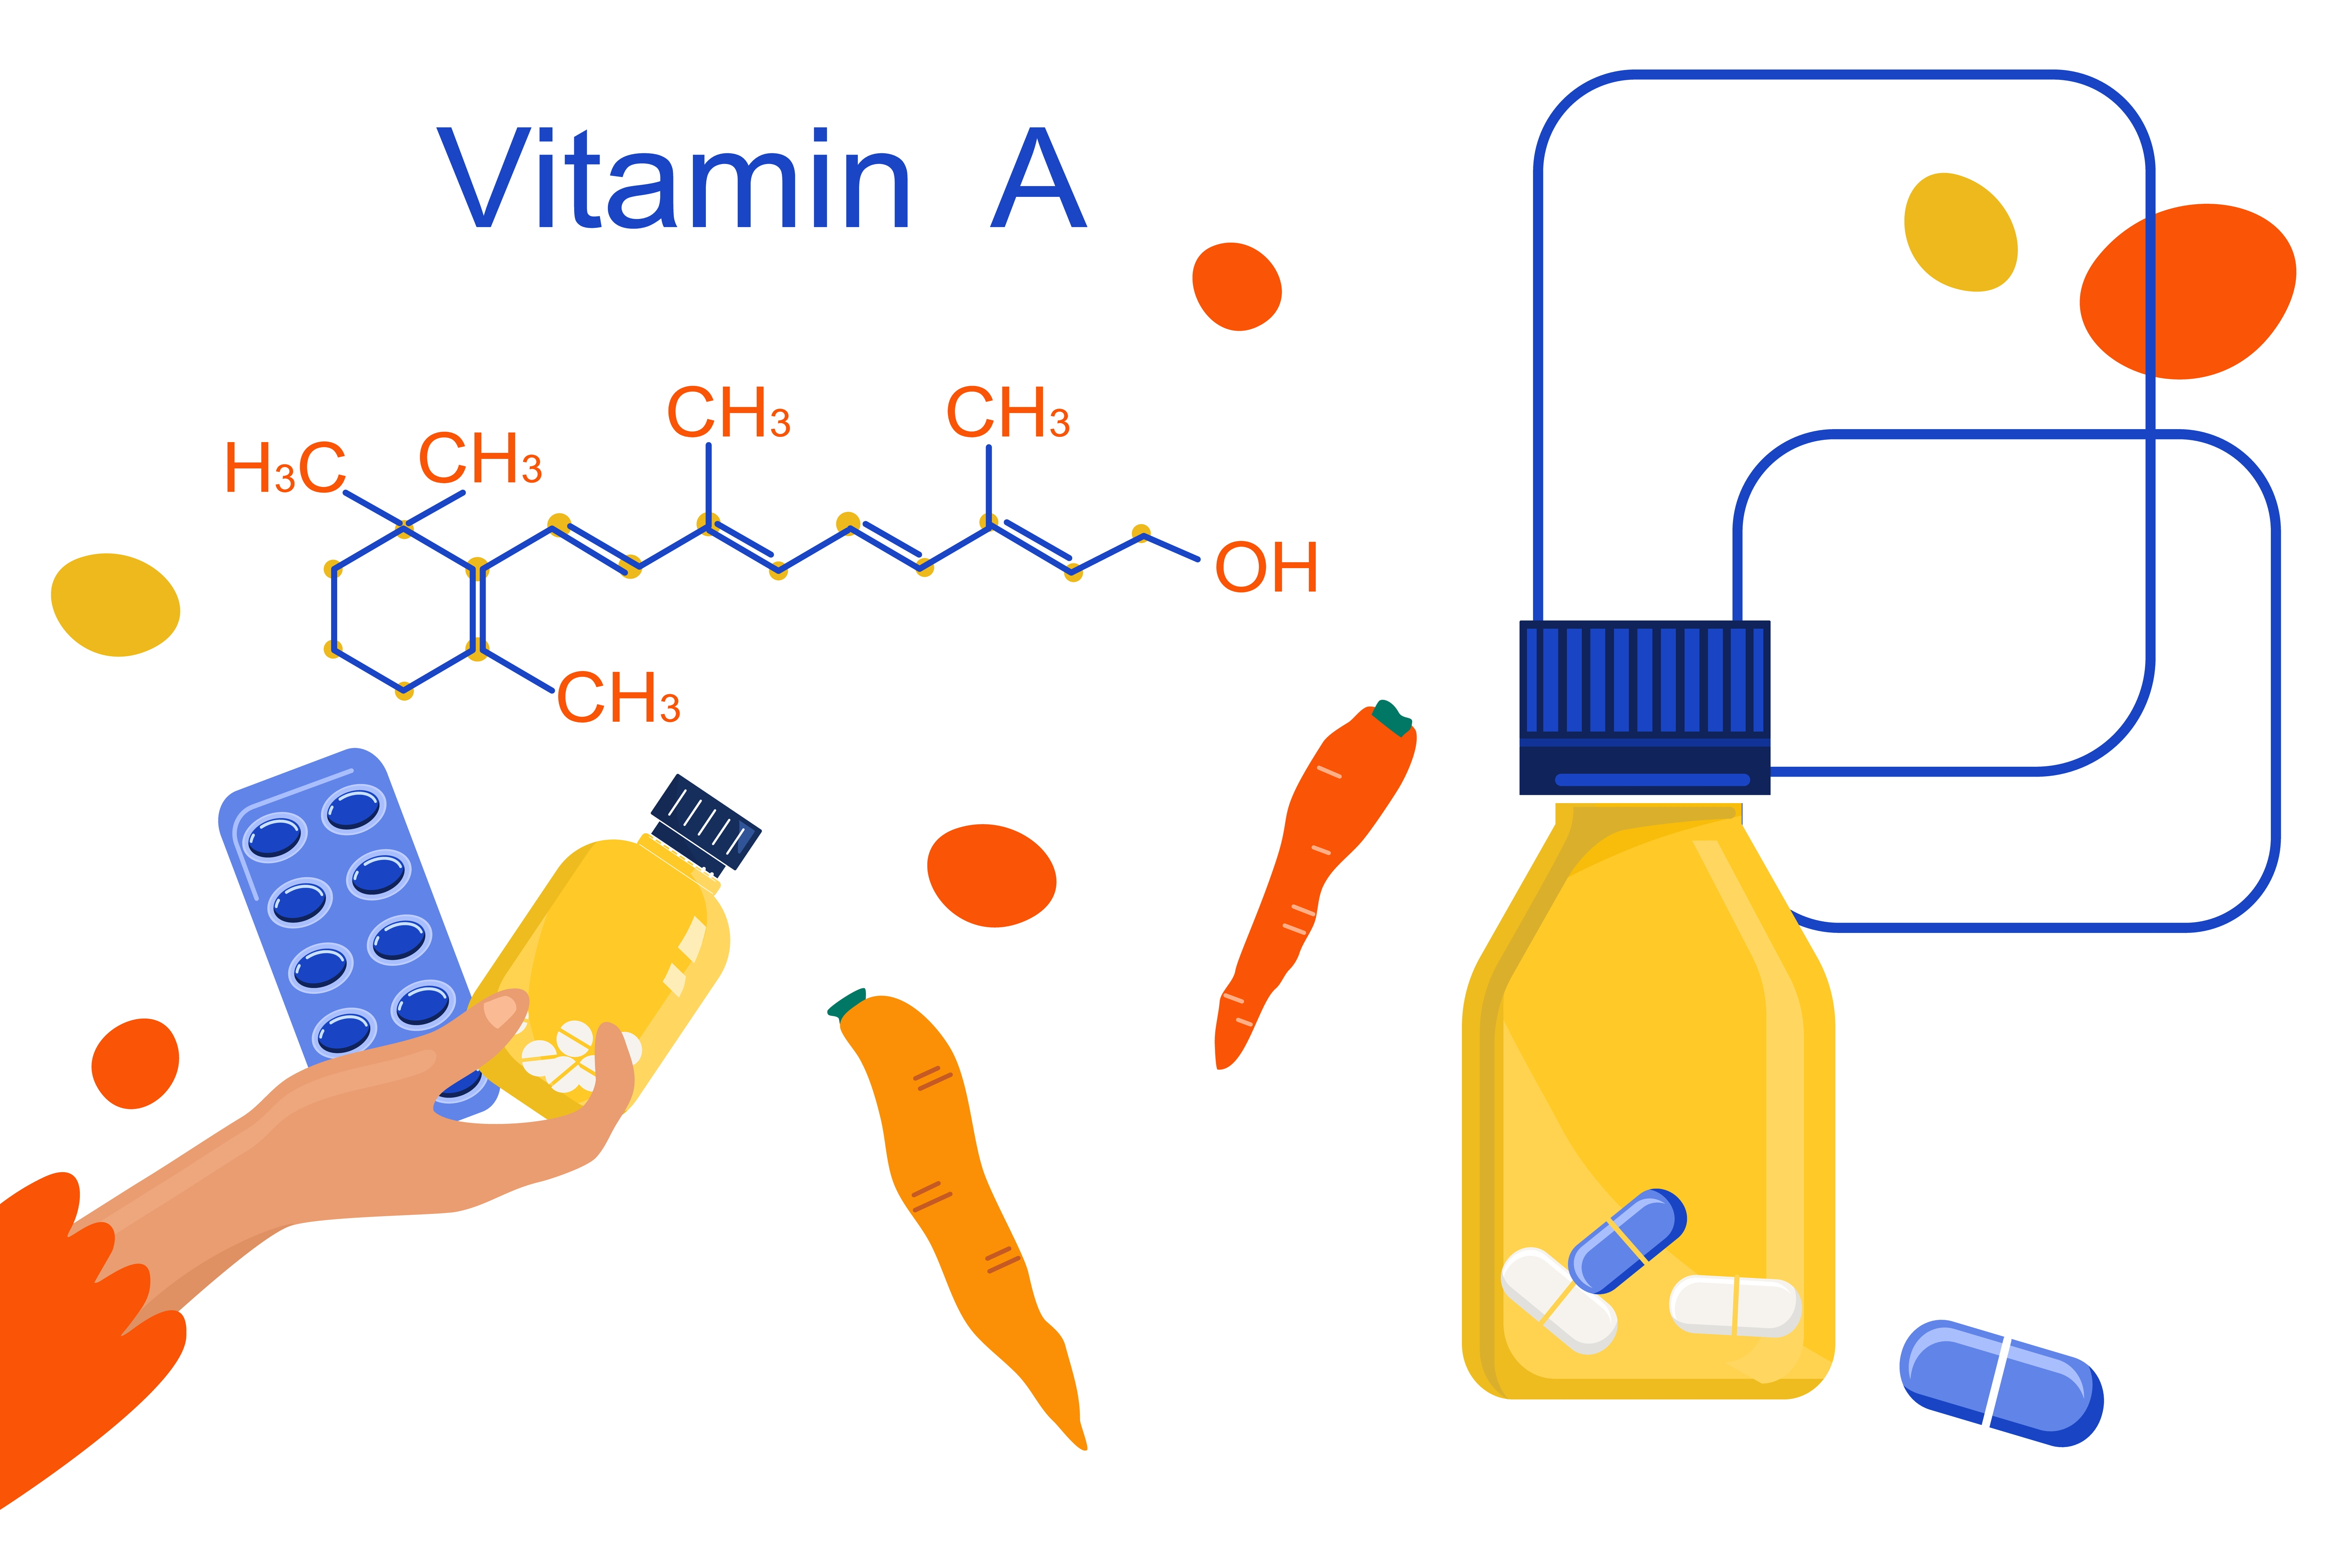 preformed vitamin,pregnant women, retinoic acid, vitamin a during pregnancy, birth defects, beta carotene, vitamin a deficiency,how much vitamin, fat soluble vitamin,baby's growth,vitamin a and pregnancy,retinoic acid metabolites